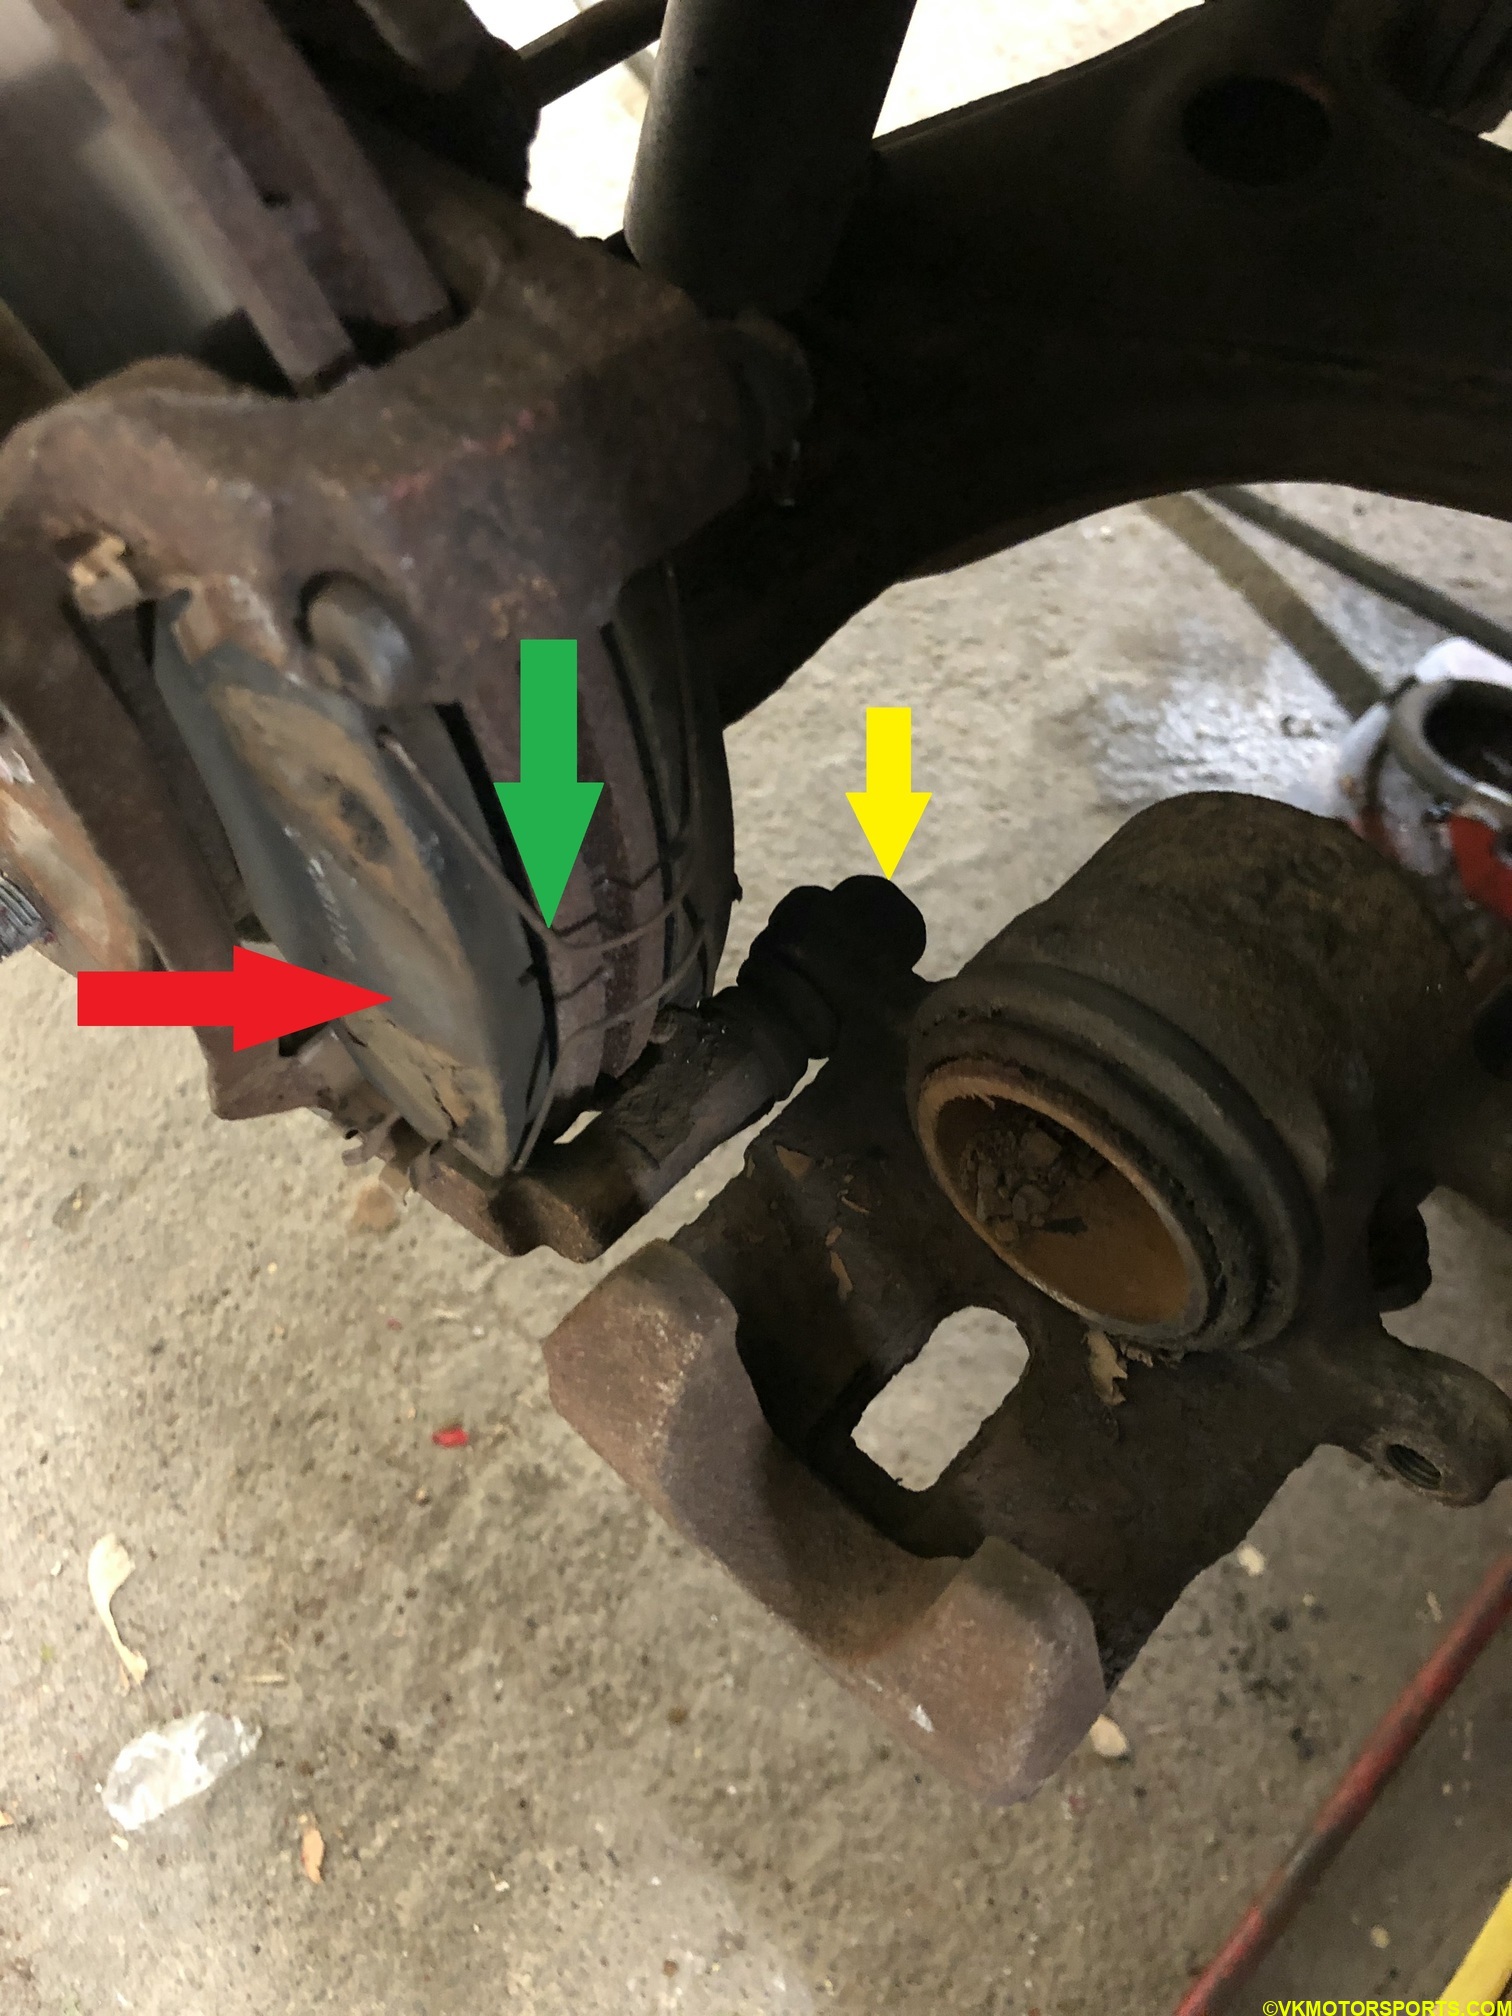 Figure 7. Flipped caliper showing the old pads and holding clip